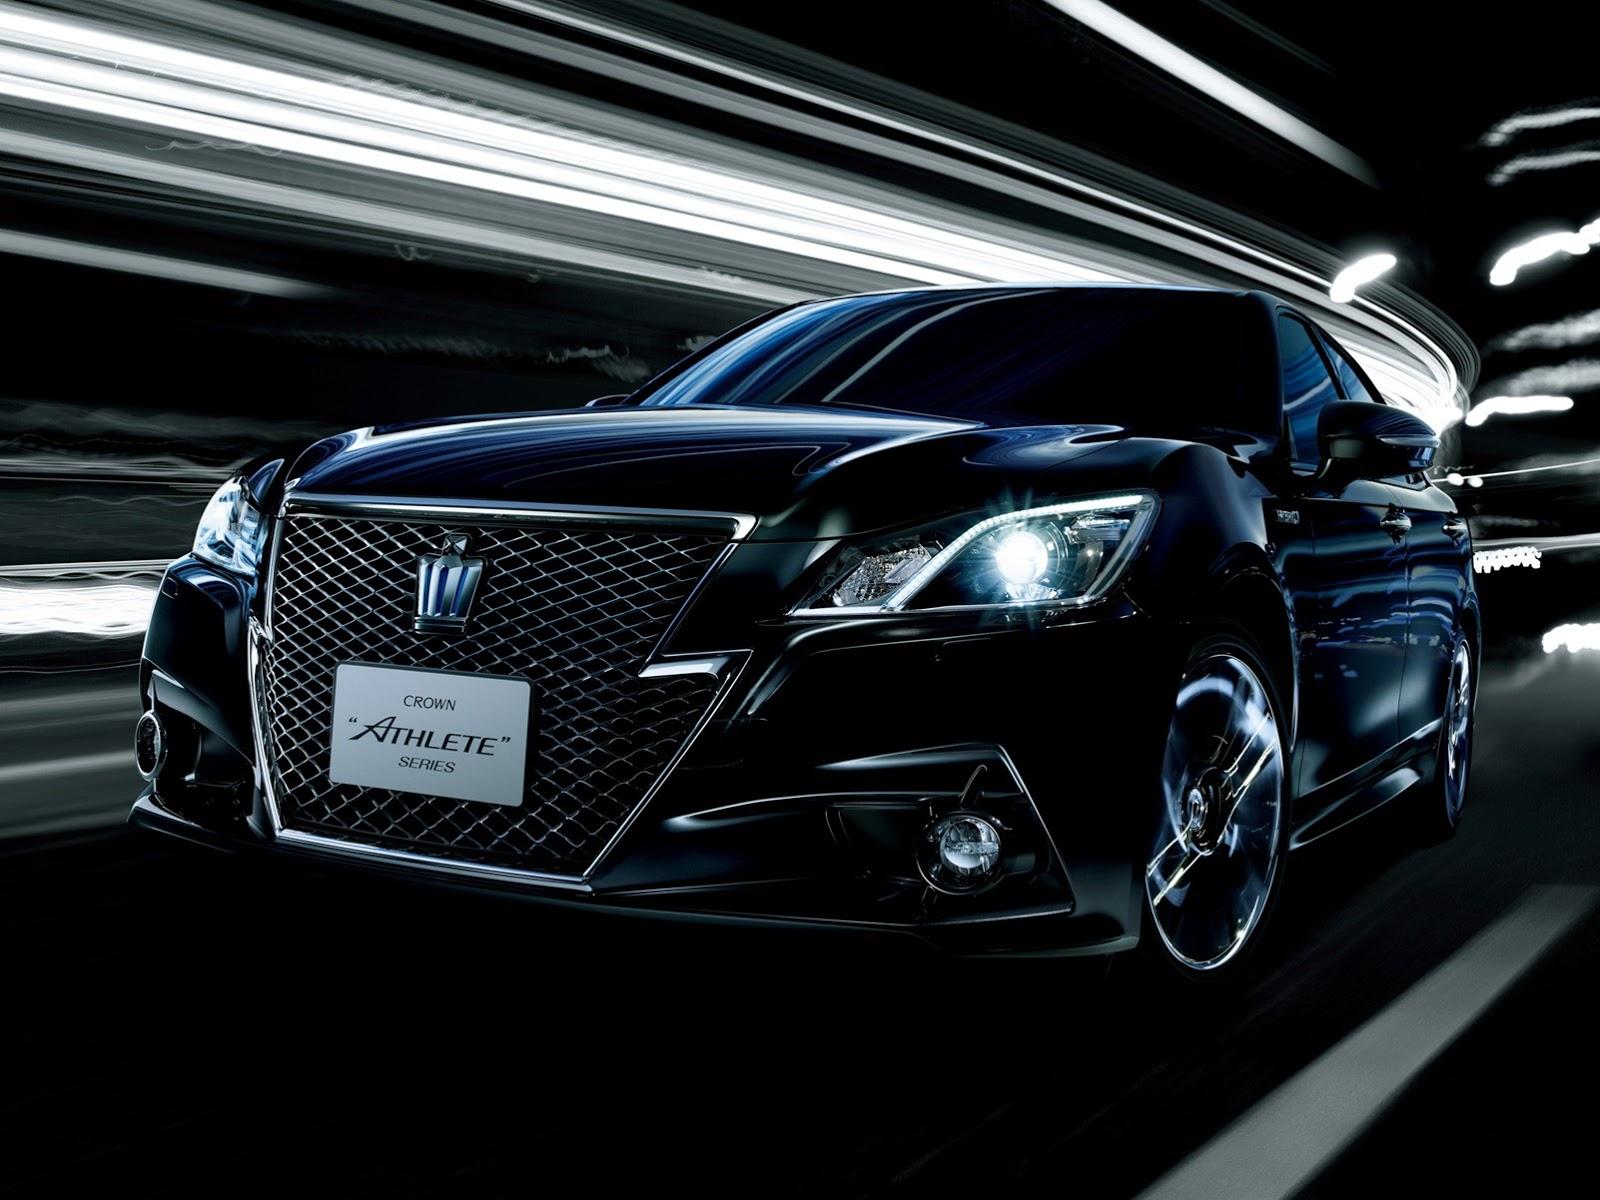 Toyota Crown 2013 photo 90360 picture at high resolution